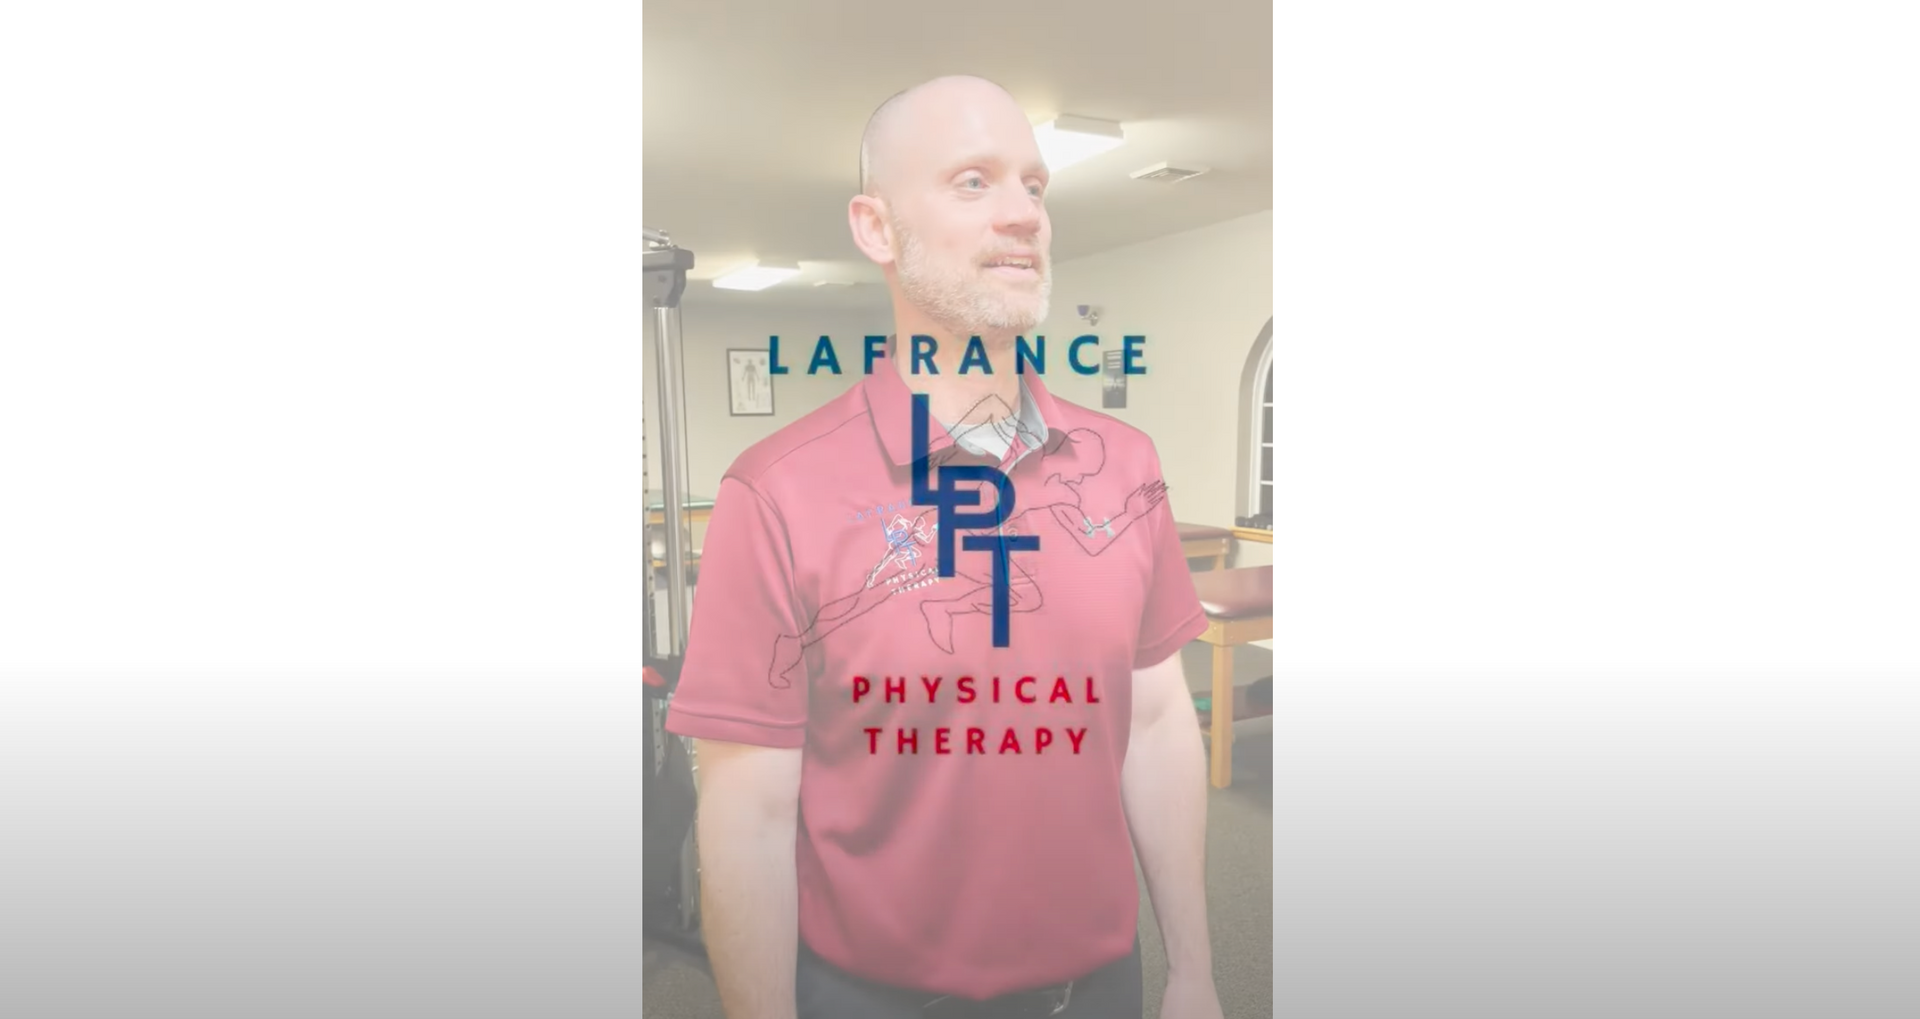 Load video: Welcome to LaFrance Physical Therapy in Eaton, NY